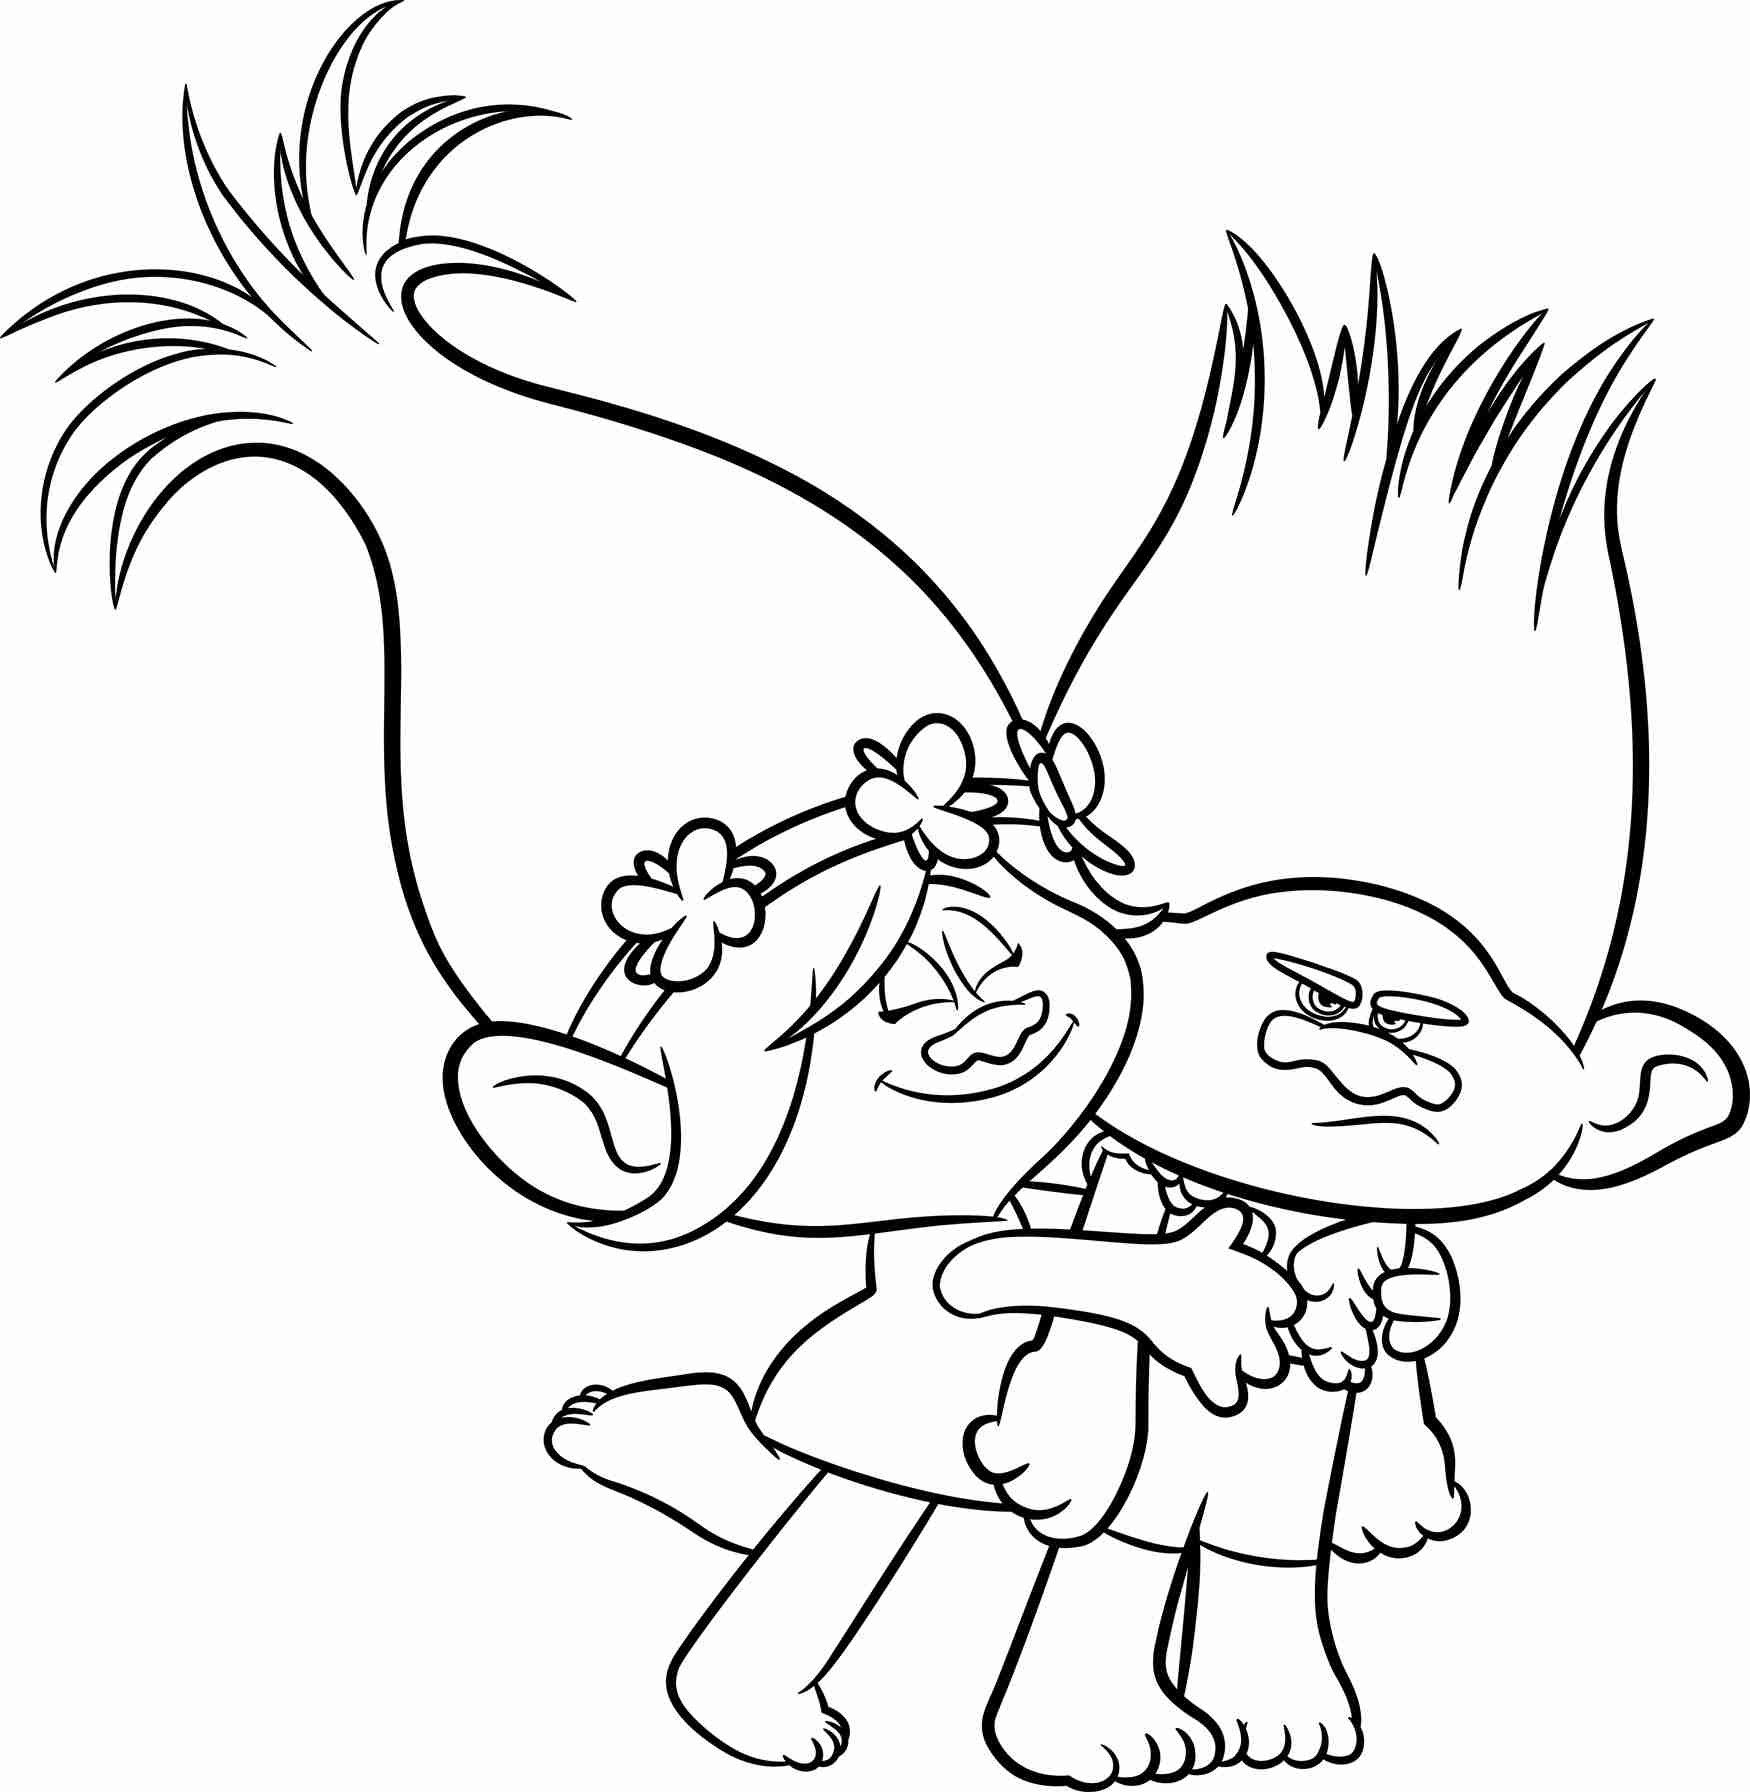 Princess Poppy from Trolls Coloring Page  Poppy coloring page, Disney  princess coloring pages, Princess coloring pages